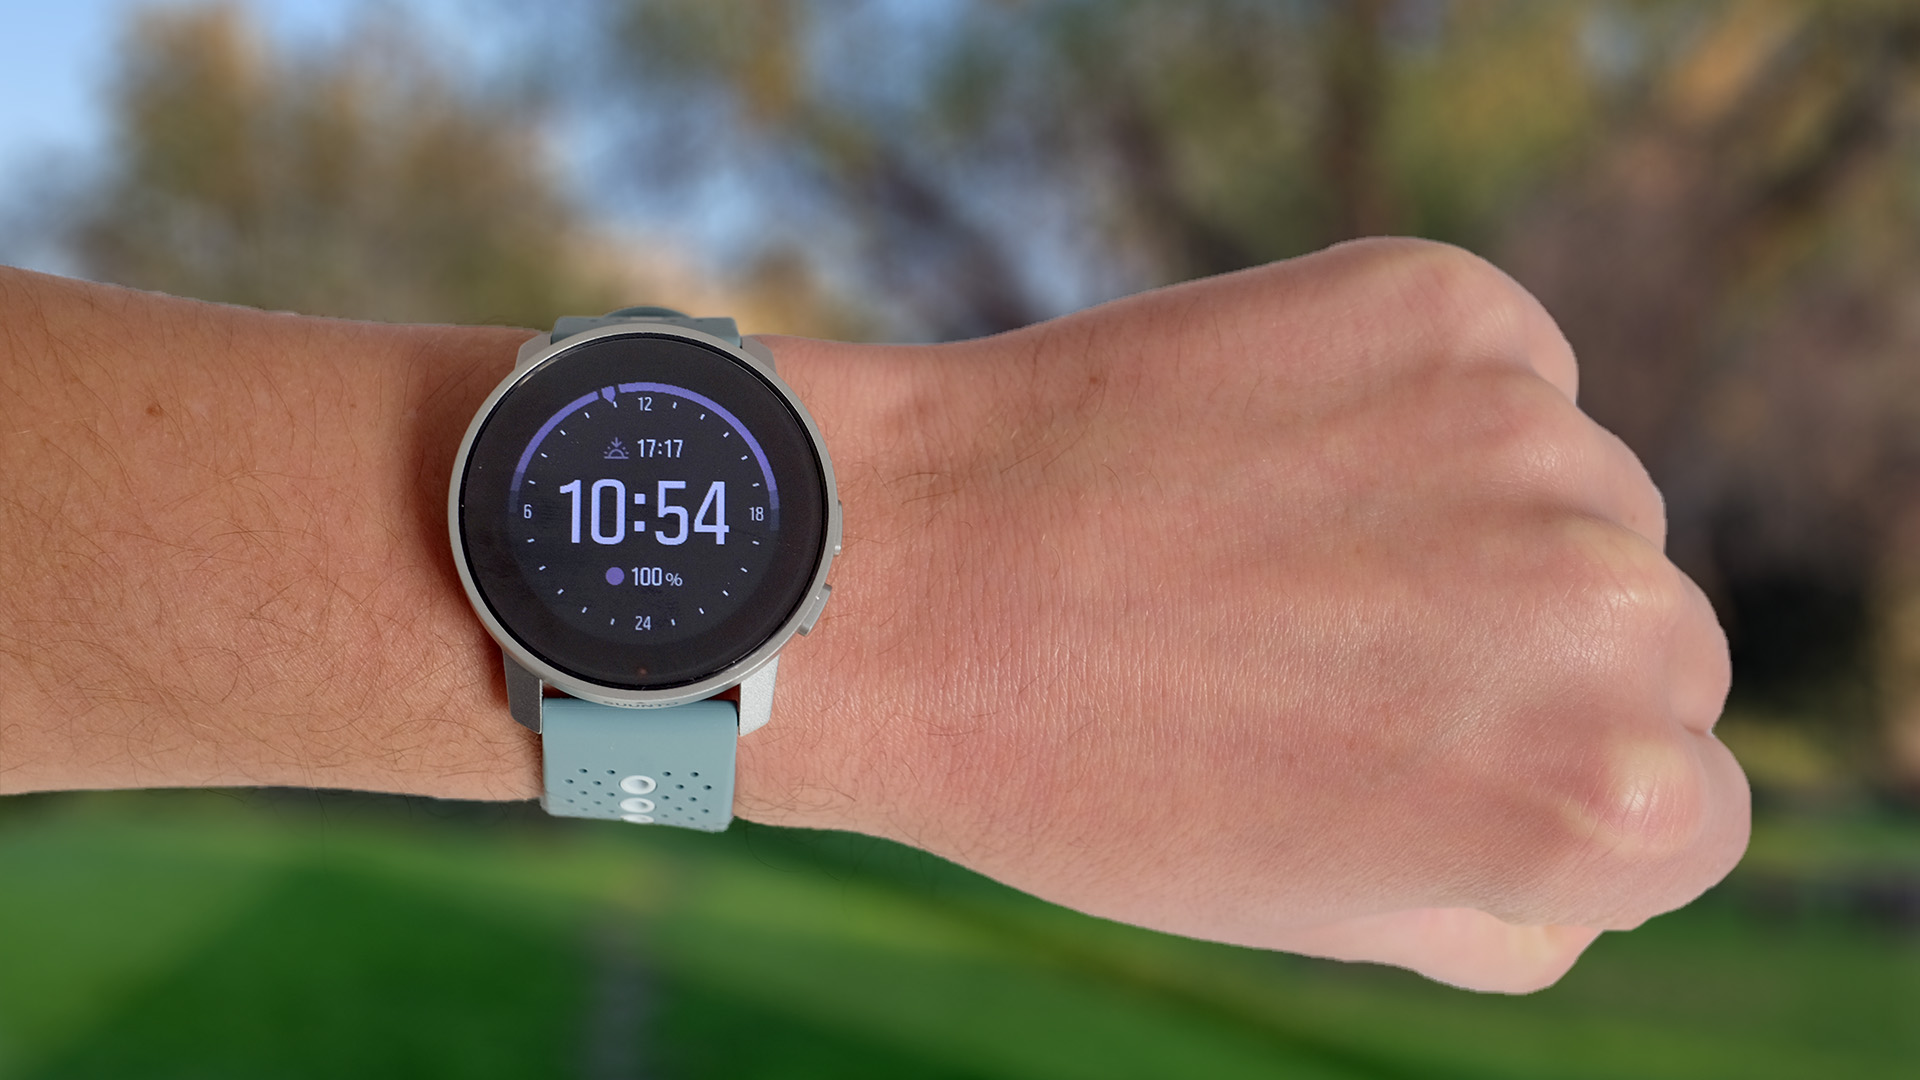 Suunto 9 Peak smartwatch review: big on style, not so hot on